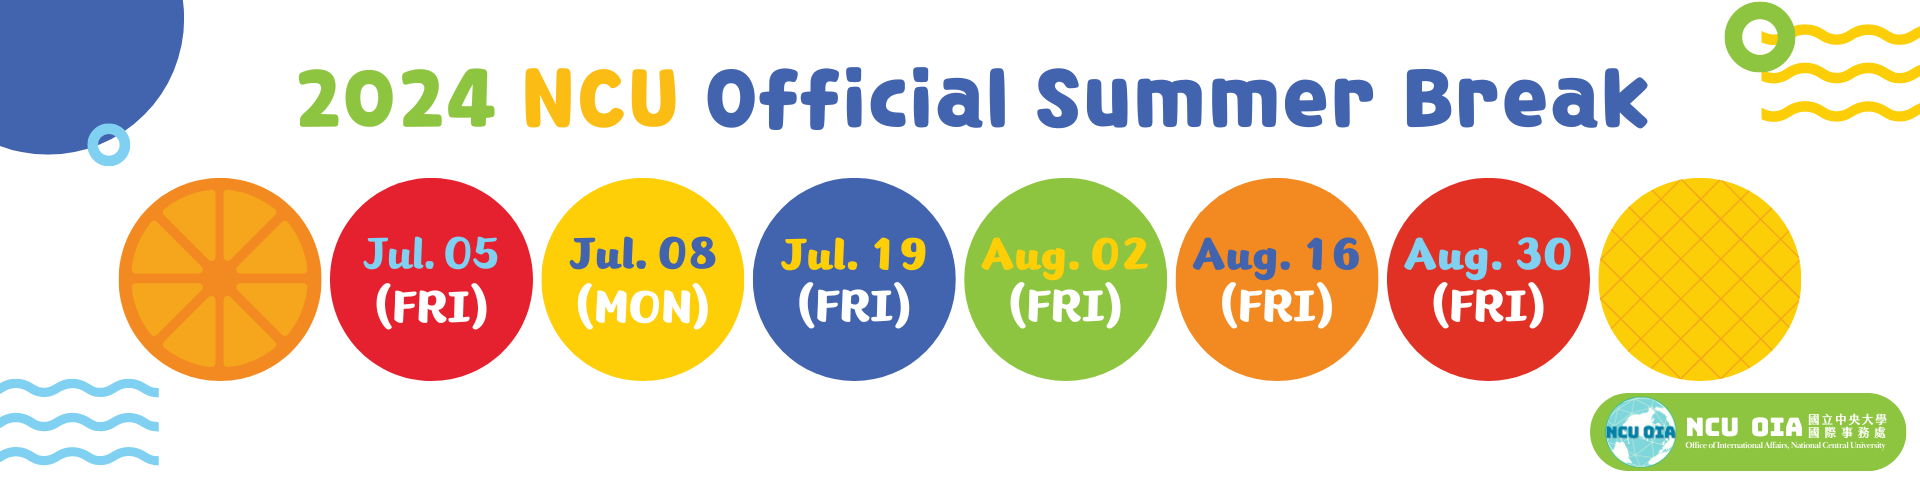 【NOTICE】2024 Official Summer Break-Please come to OIA before or avoid these days